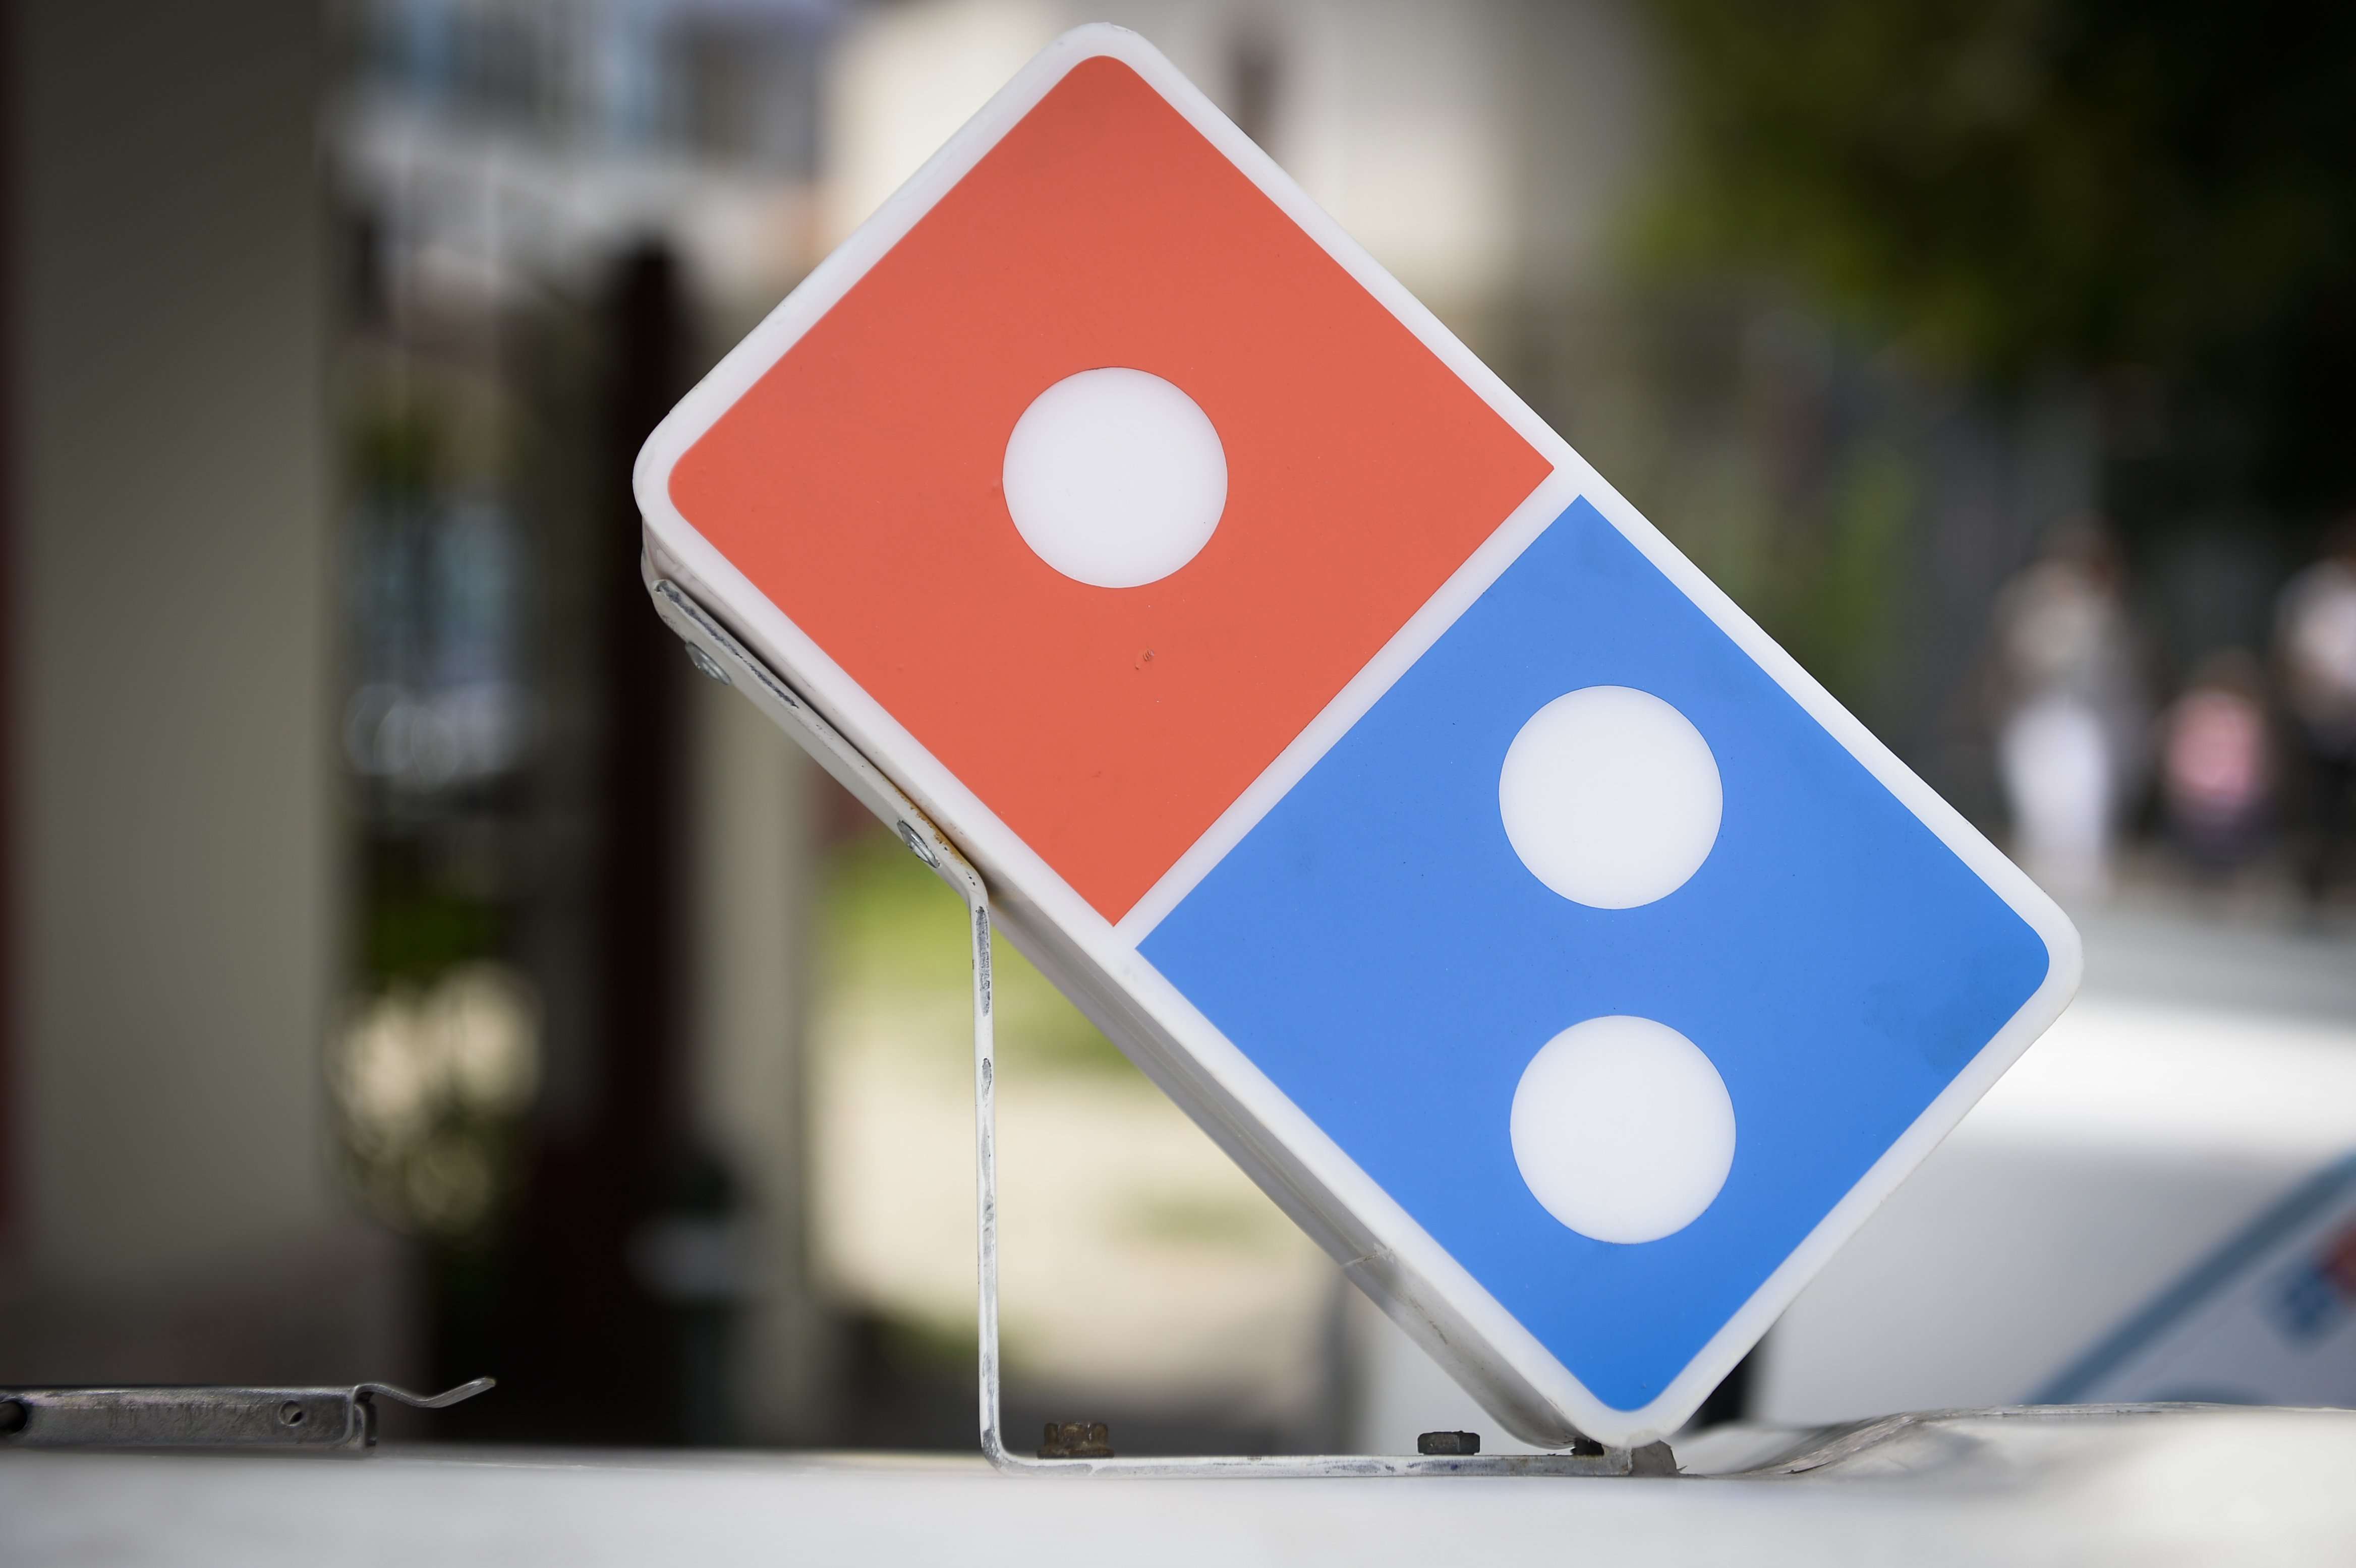 image for TIL in 2018 the Domino’s in Russia offered up to 100 free pizzas every year for 100 years if a customer got the Domino’s logo tattooed visibly on their body. Initially intended to last a month the promotion proved to be so popular Domino’s ended it after a week with 350 accepted winners.